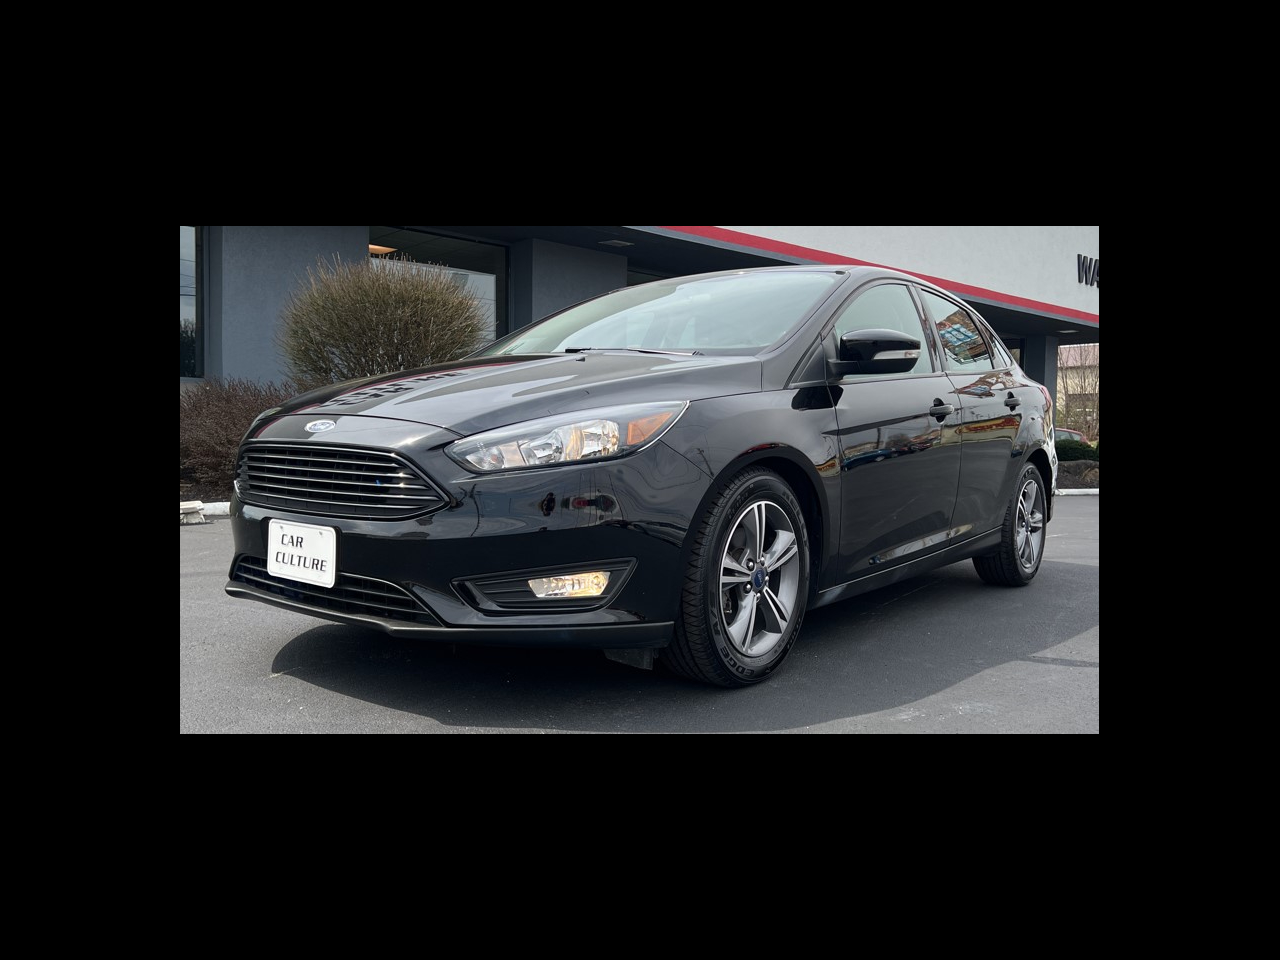 Ford Focus 4dr Sdn SE 2017